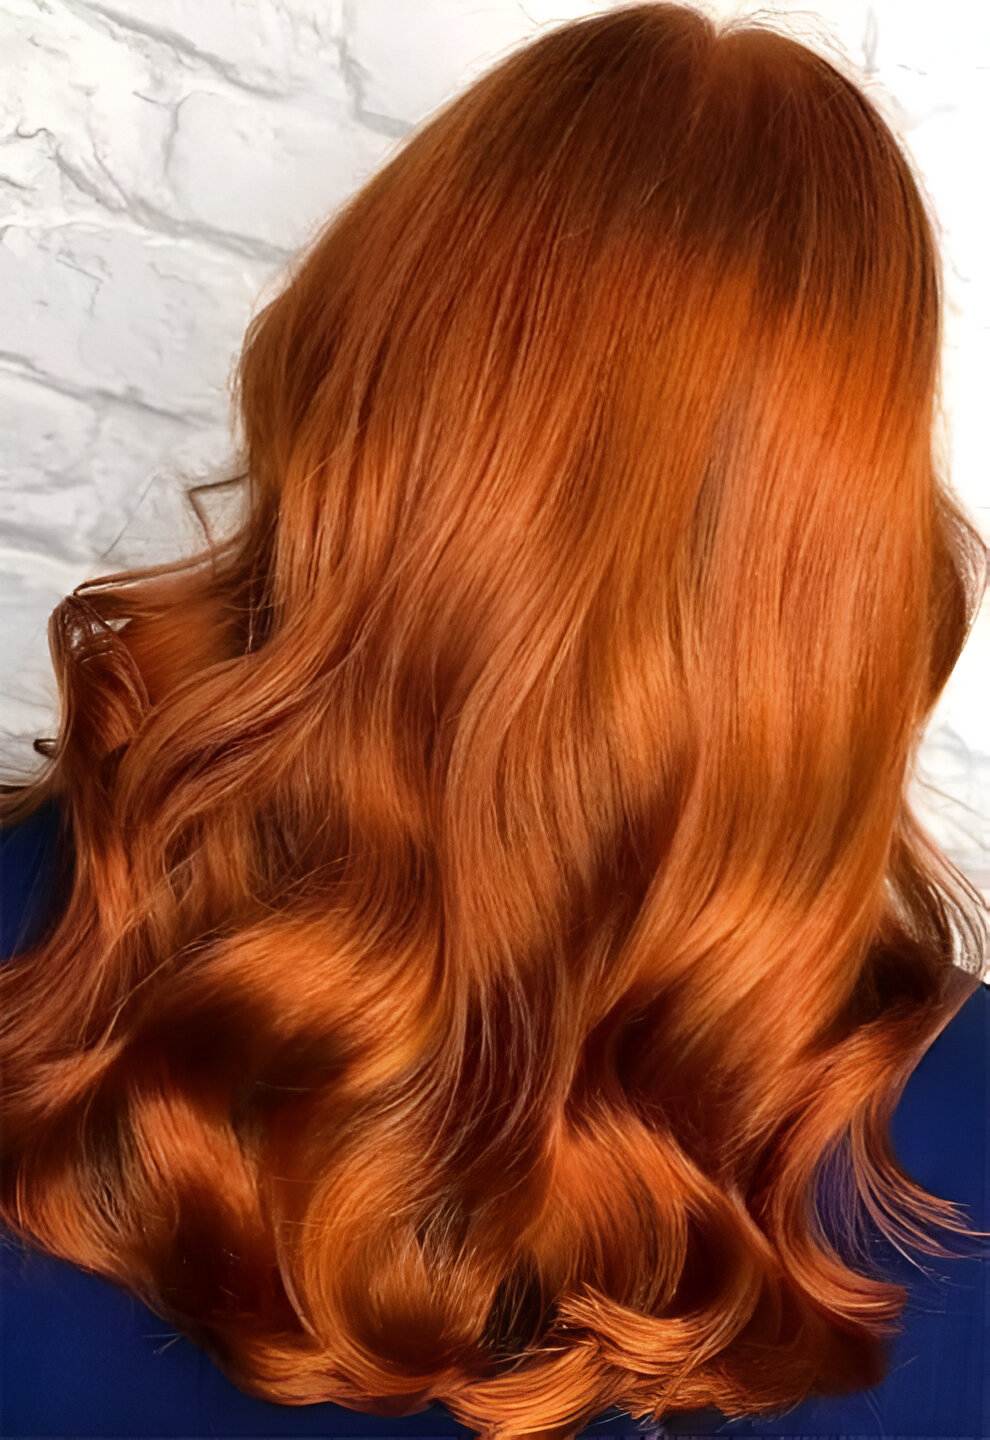 25 Gorgeous Orange Hair Ideas To Look Stunning Like A Model - 207